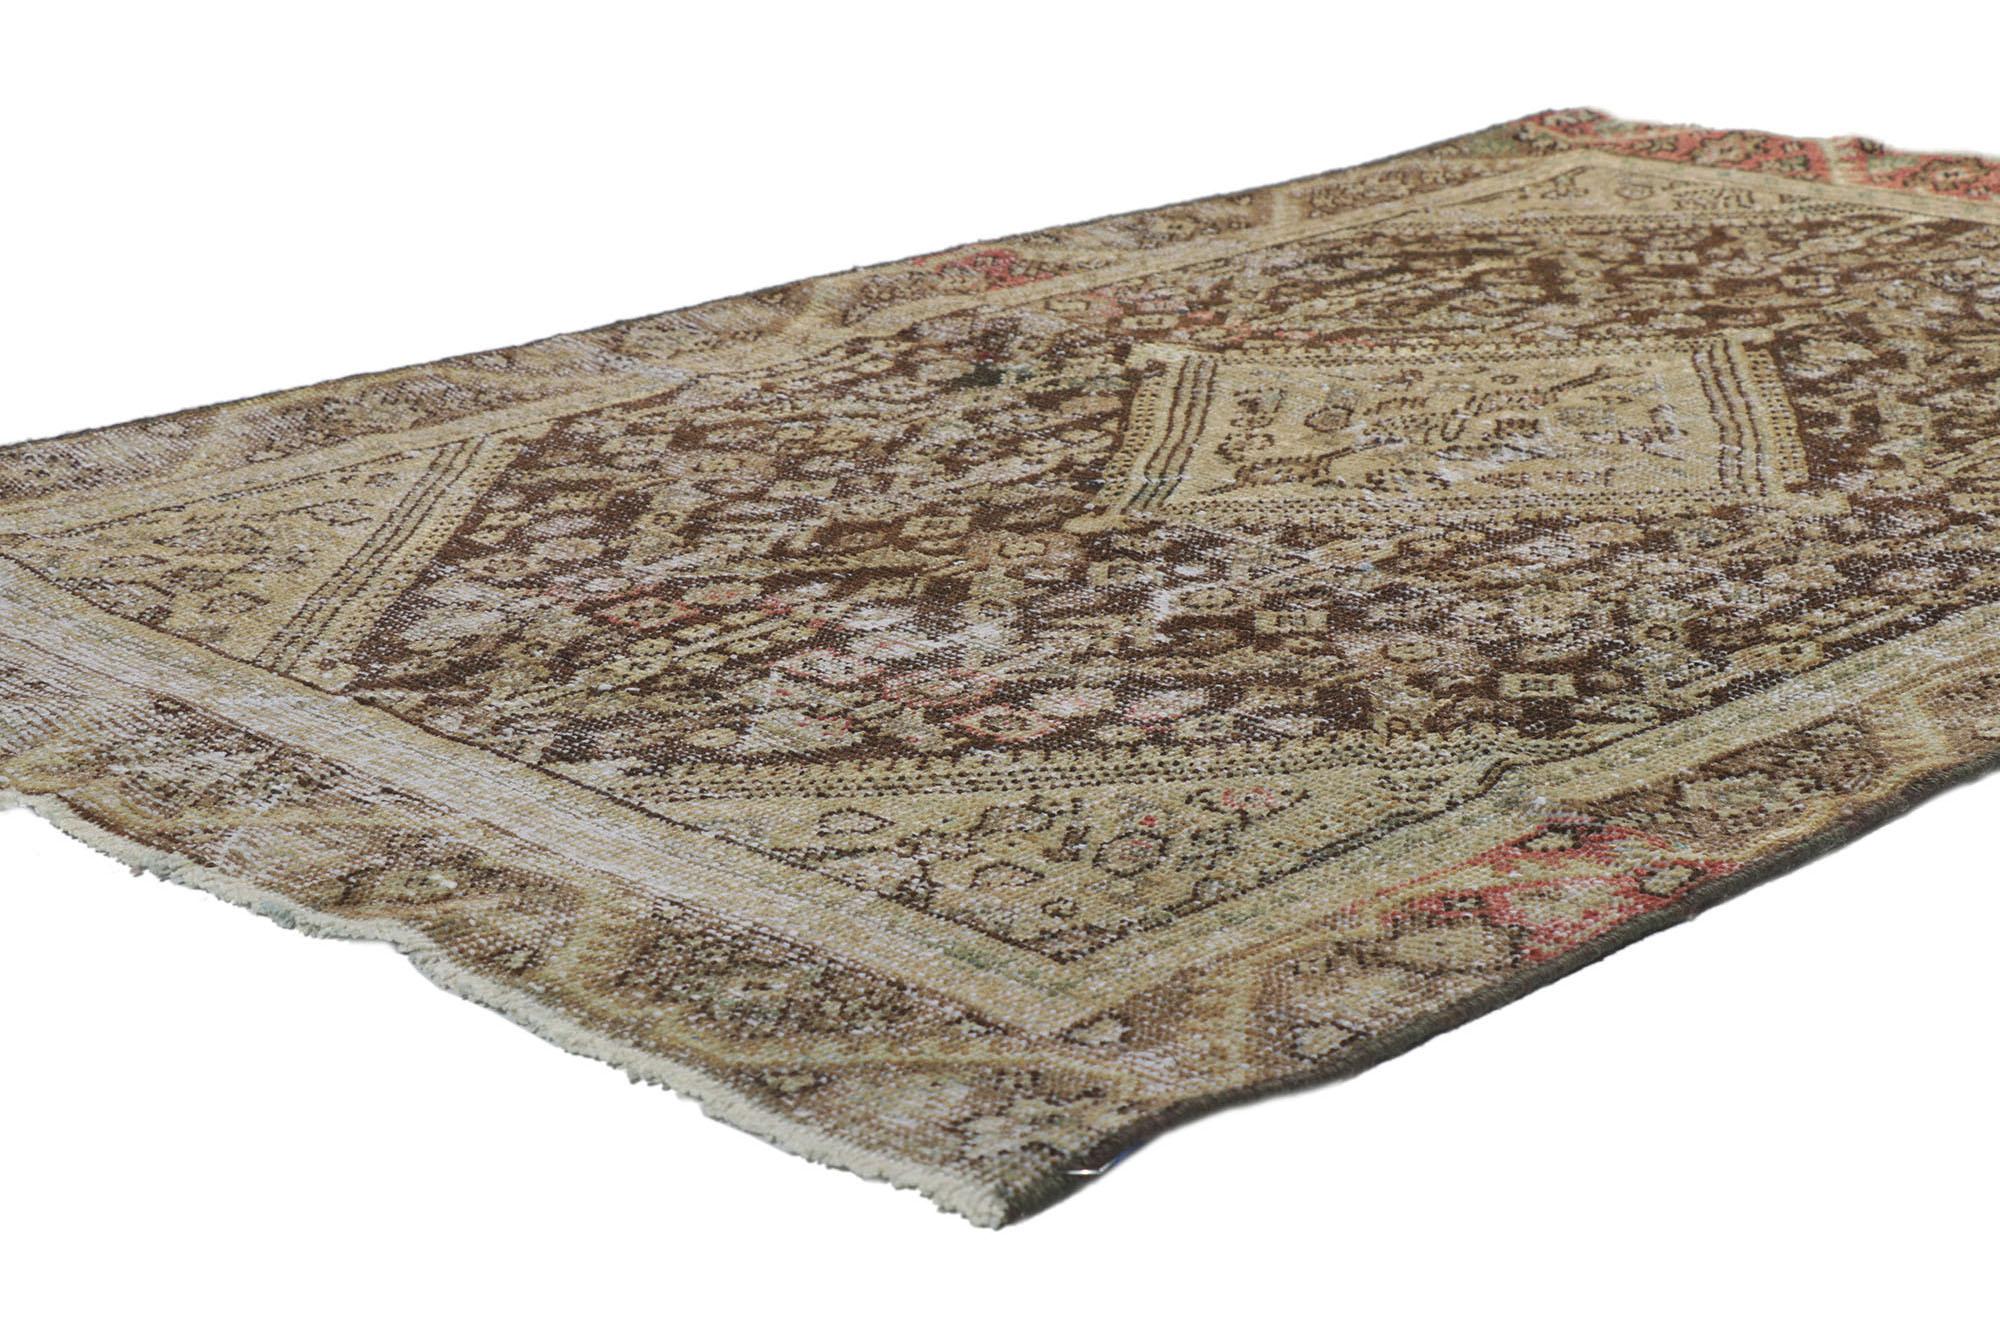 60999 Distressed Antique Persian Mahal Rug, 03'10 x 08'06.
Relaxed refinement meets rugged beauty in this hand-knotted wool distressed antique Persian Mahal rug. Its captivating all-over floral lattice pattern is meticulously crafted using the Mina